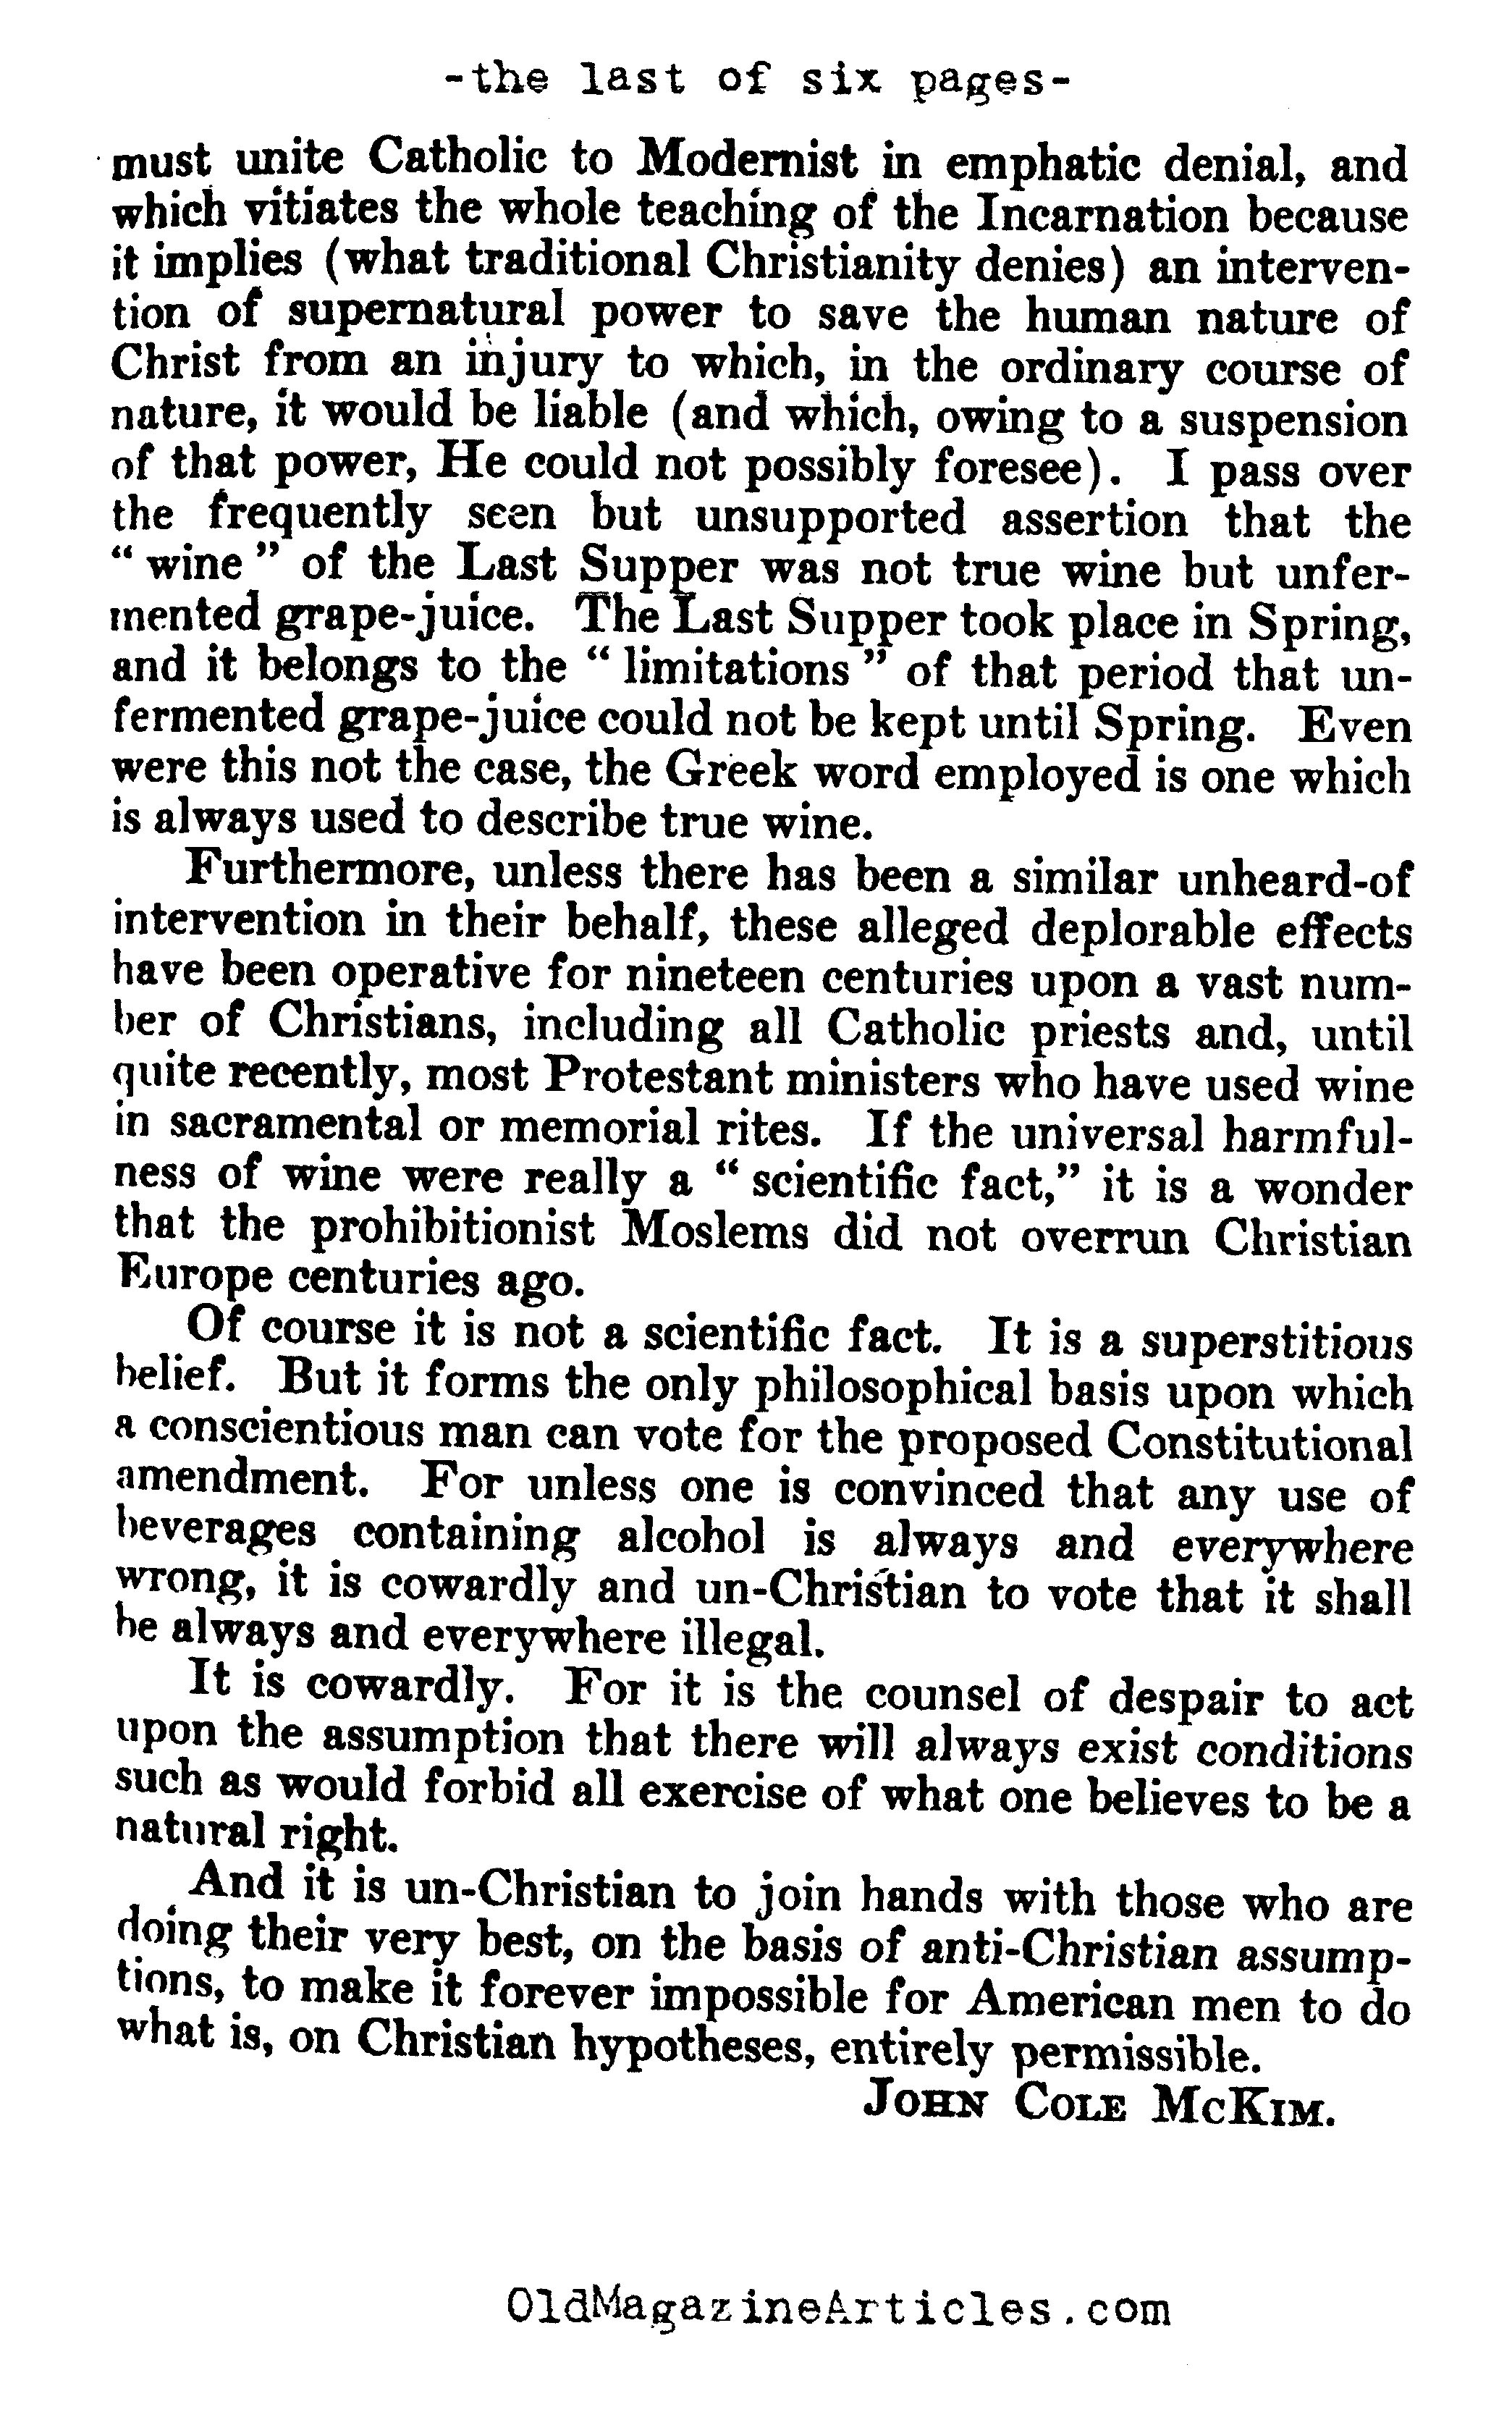 Christianity  Versus  Prohibition (The North American Review, 1918)